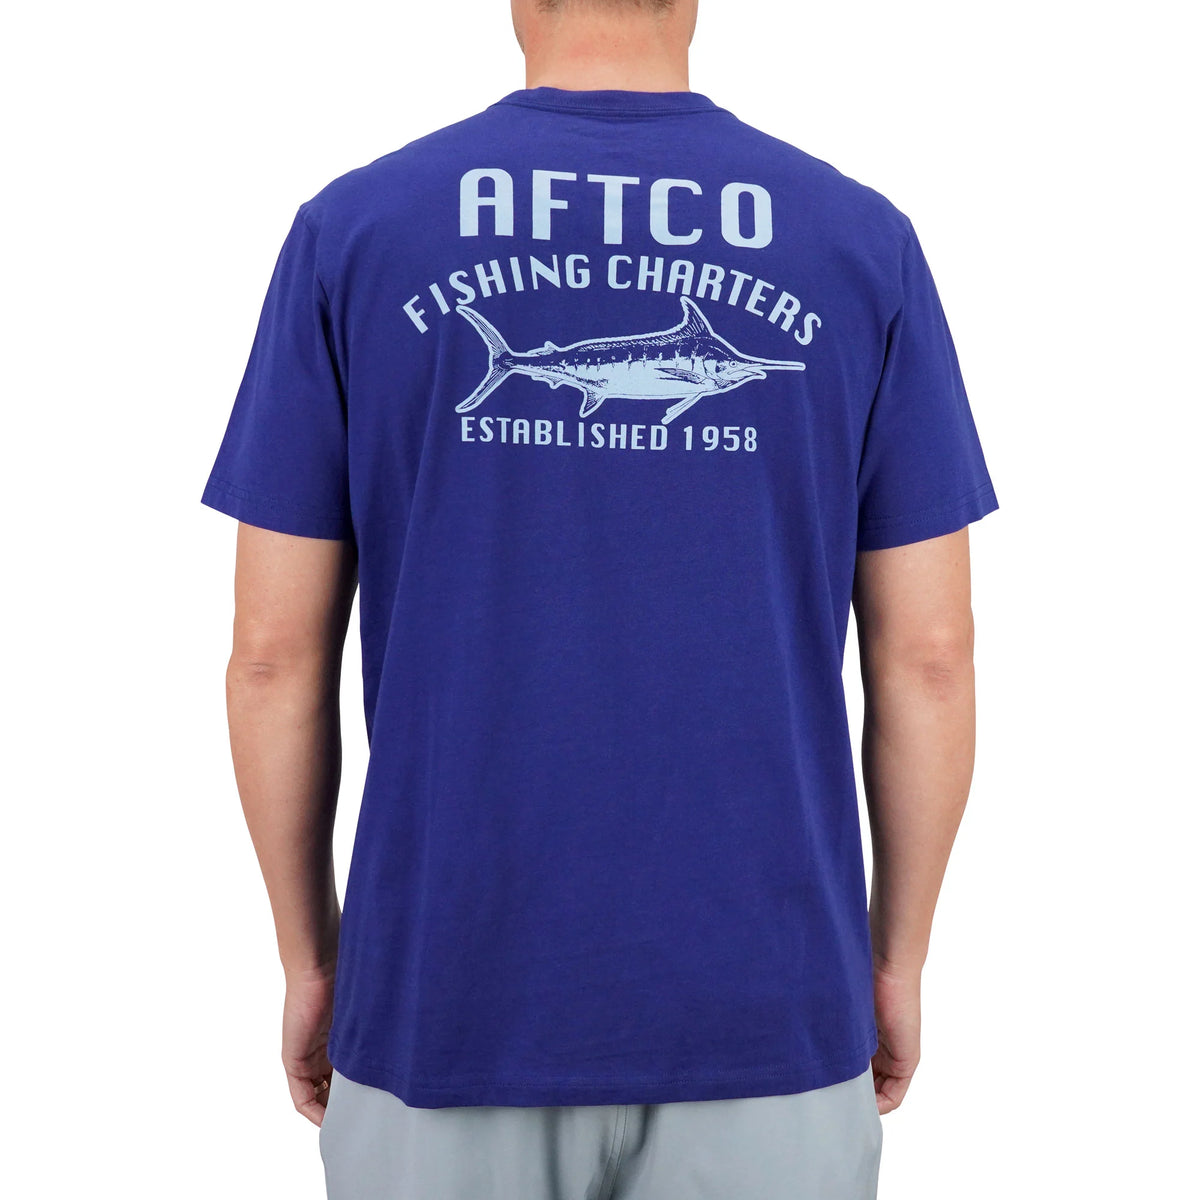 Aftco Fishing Charters SS T Shirt (MT1429) – Wind Rose North Ltd. Outfitters